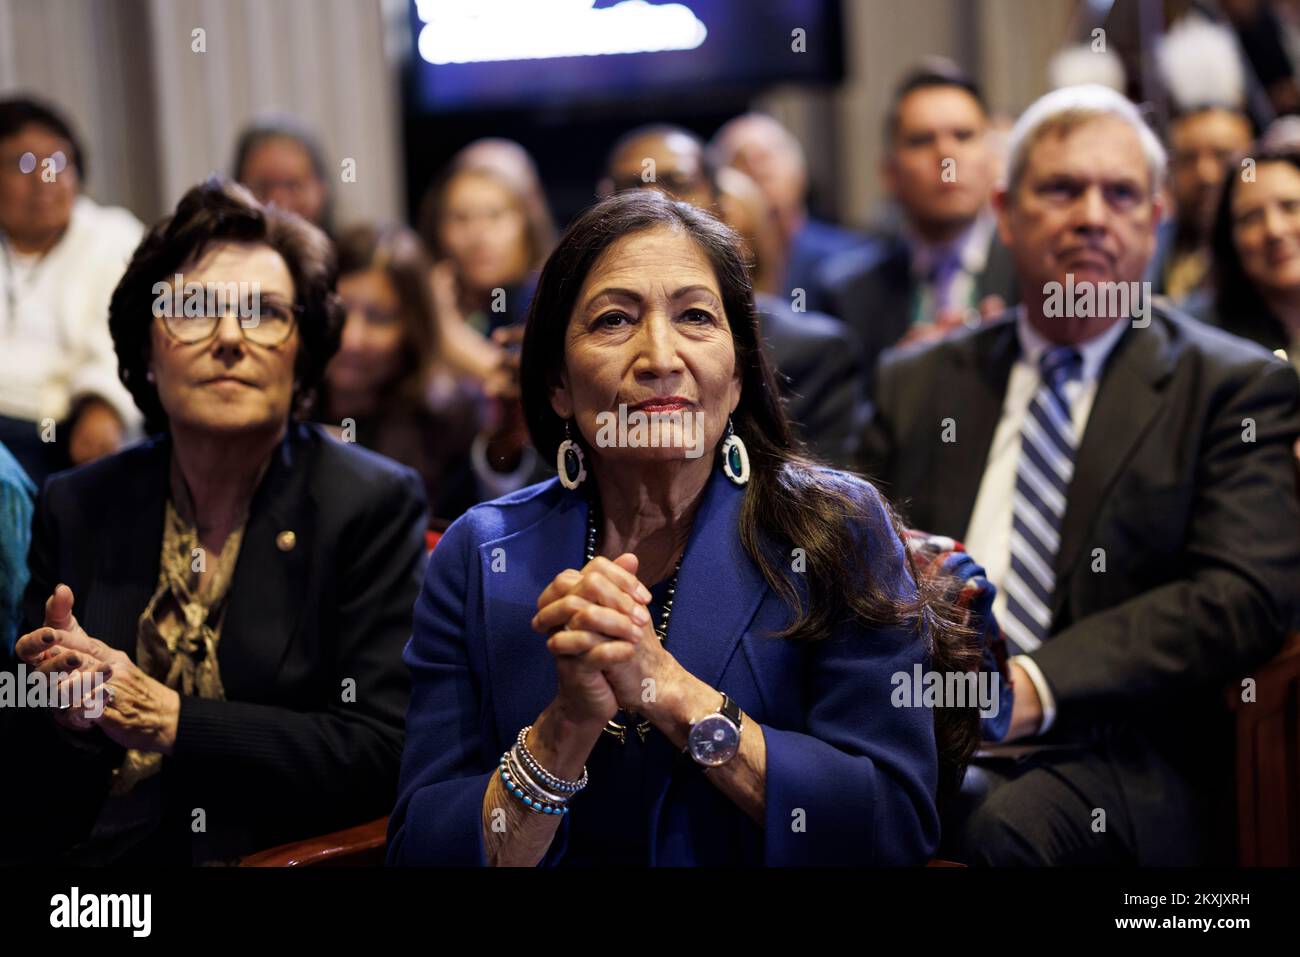 Washington, DC, USA. 30th Nov, 2022. United States Secretary of the Interior Deb Haaland, and US Senator Jacky Rosen (Democrat of Nevada), in the audience during the White House Tribal Nations Summit at the Department of the Interior in Washington, DC, US, on Wednesday, Nov. 30, 2022. The first in-person Tribal Nations Summit of the Biden administration is allowing federal officials and Tribal leaders to engage about ways to invest in and strengthen Native communities, according to the White House. Credit: Ting Shen/Pool via CNP/dpa/Alamy Live News Stock Photo